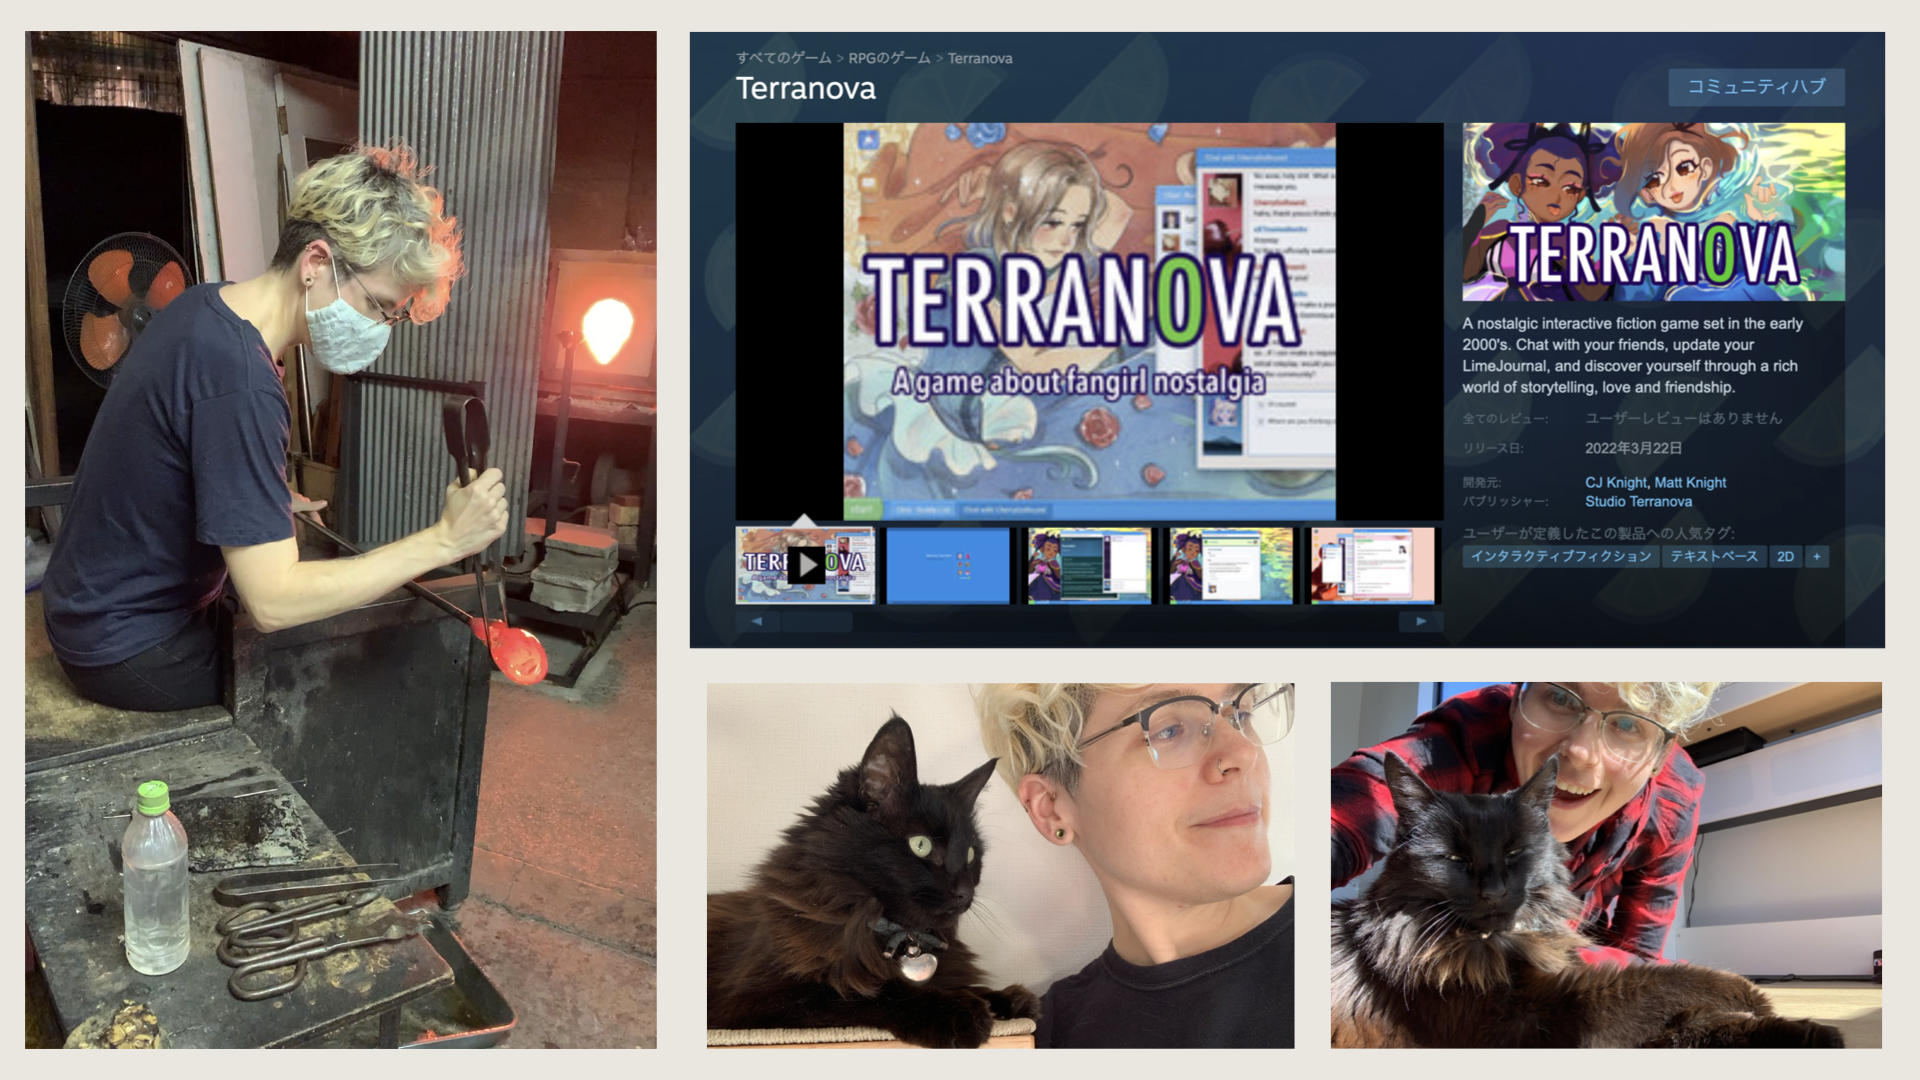 Various photos of CJ, glassblowing, taking selfies with their cat, and a screenshot of Terranova.